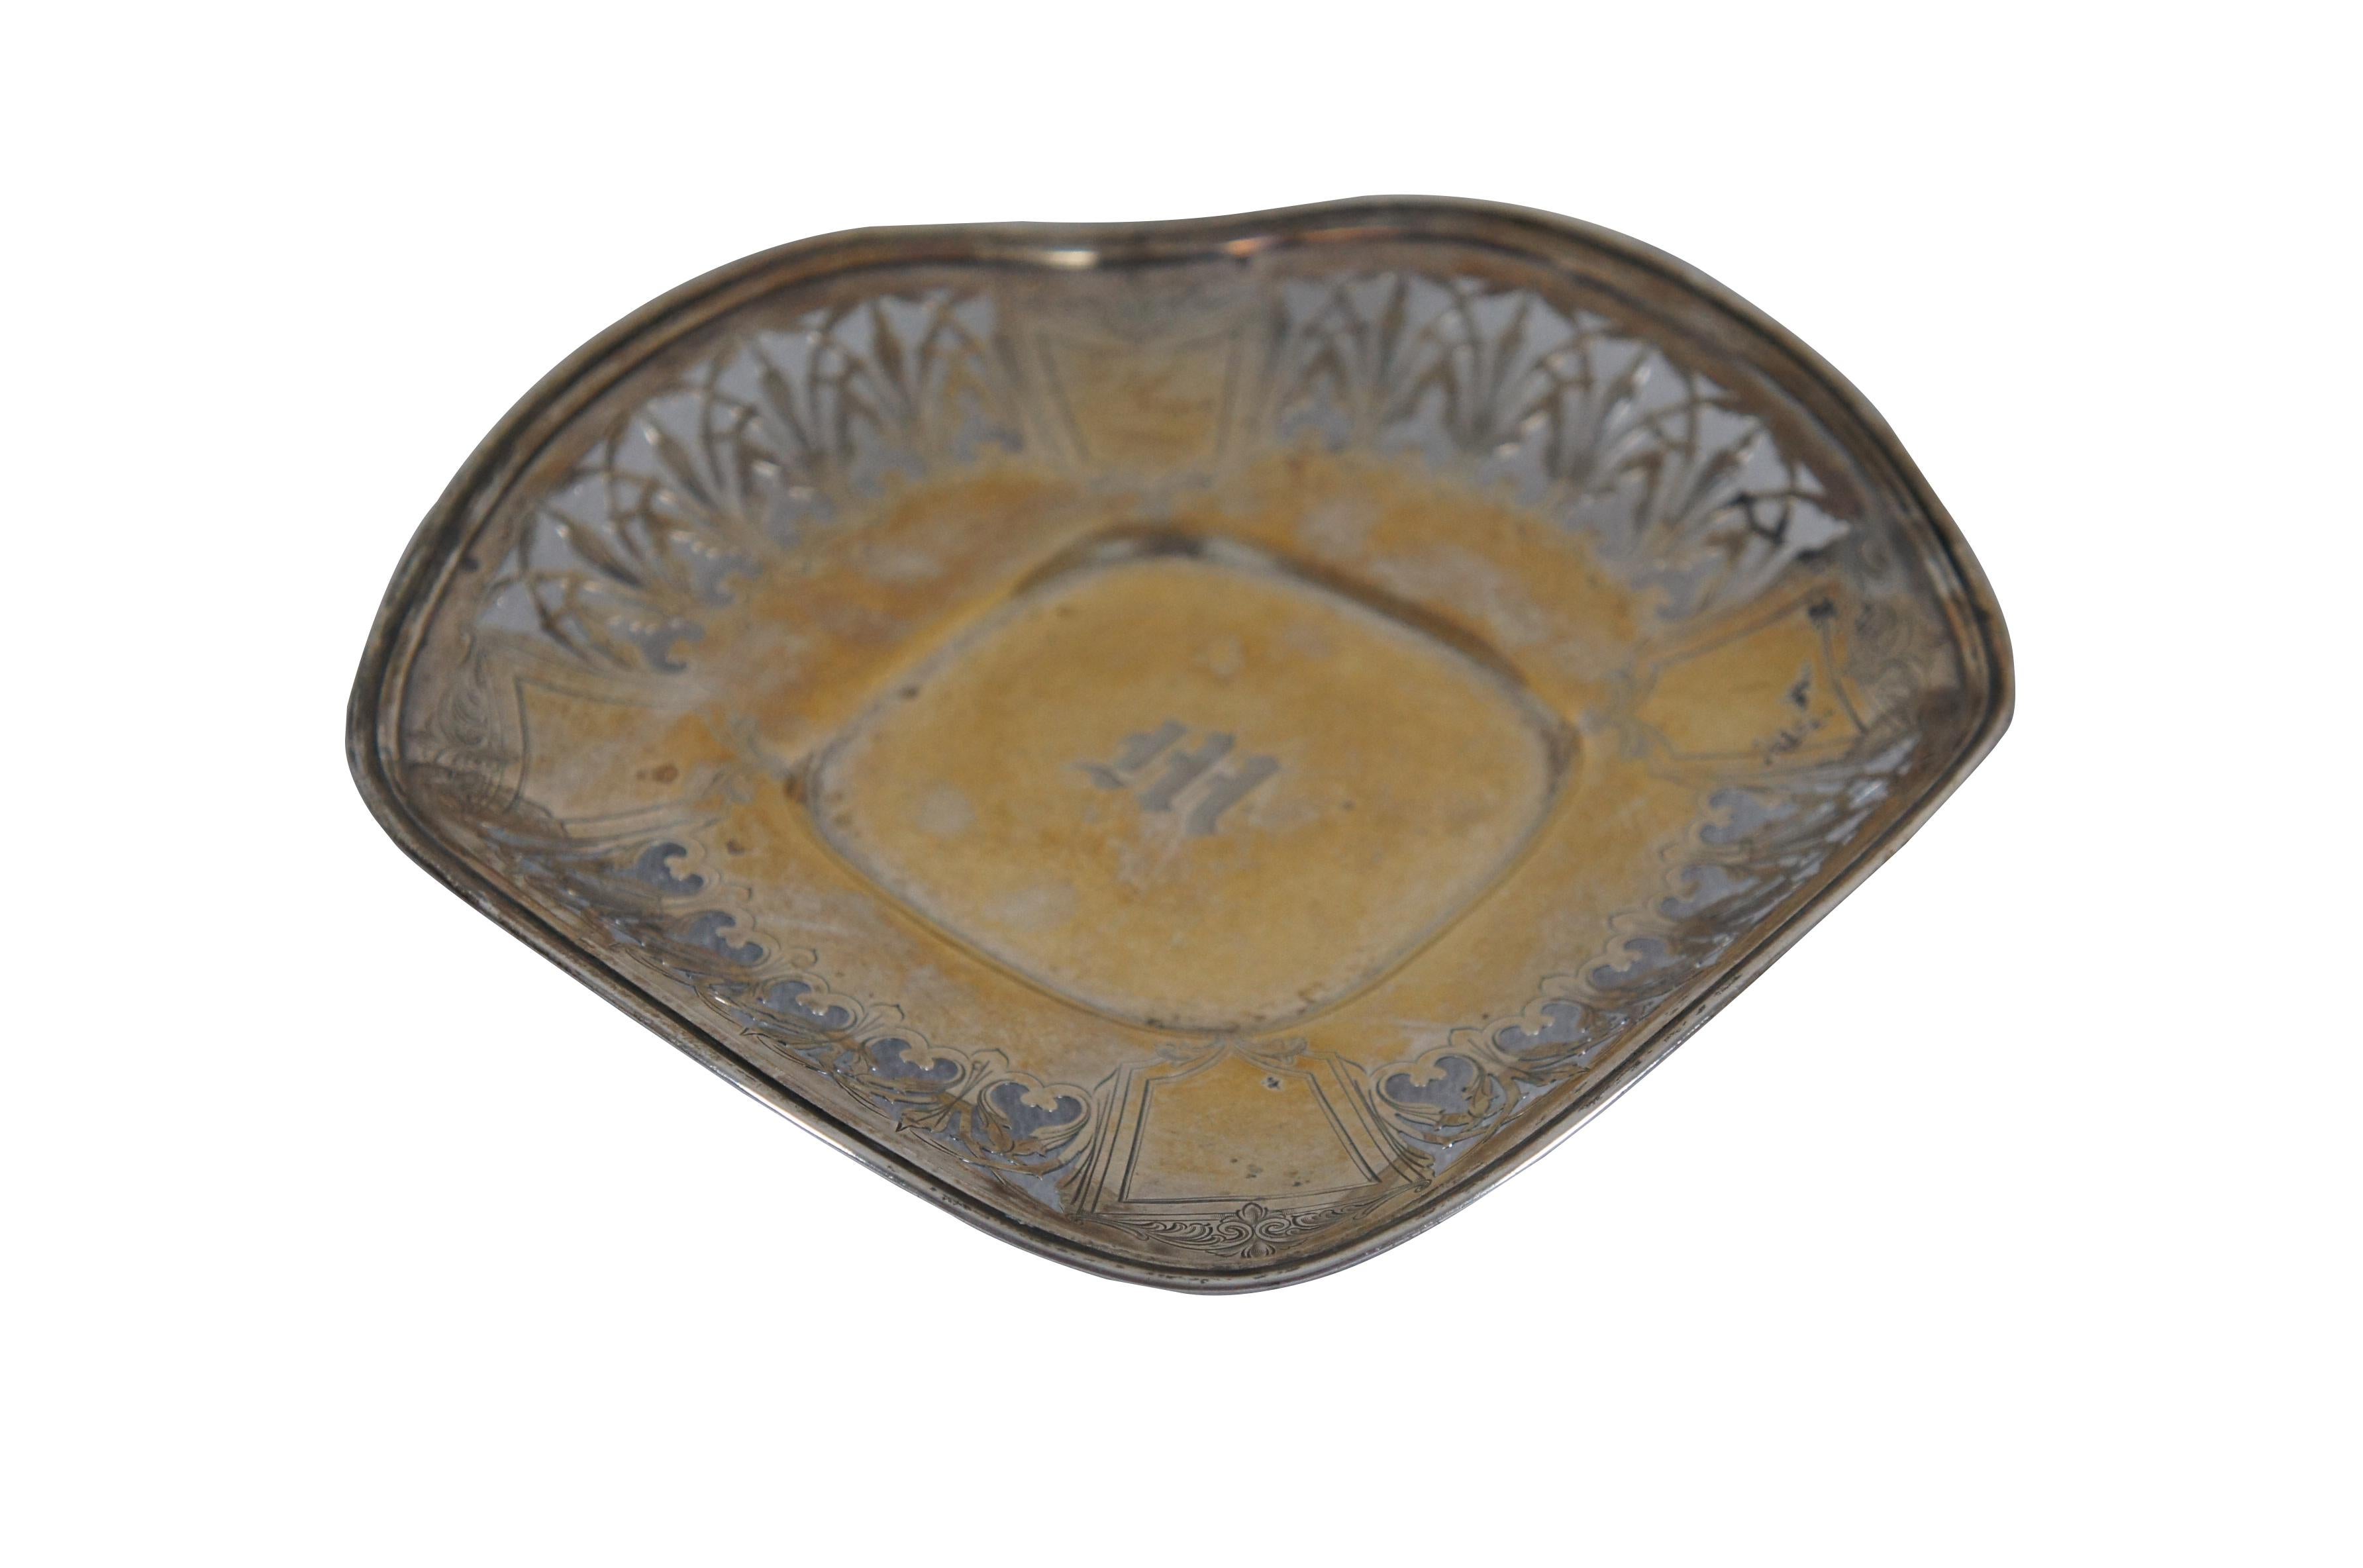 Late 19th to early 20th century sterling silver serving tray / dish, item number 1713, by James E. Blake & Company. Square serpentine shape with rounded corners and sides ruffled upward. Pierced leaf motif with etched foliate shields at the corners